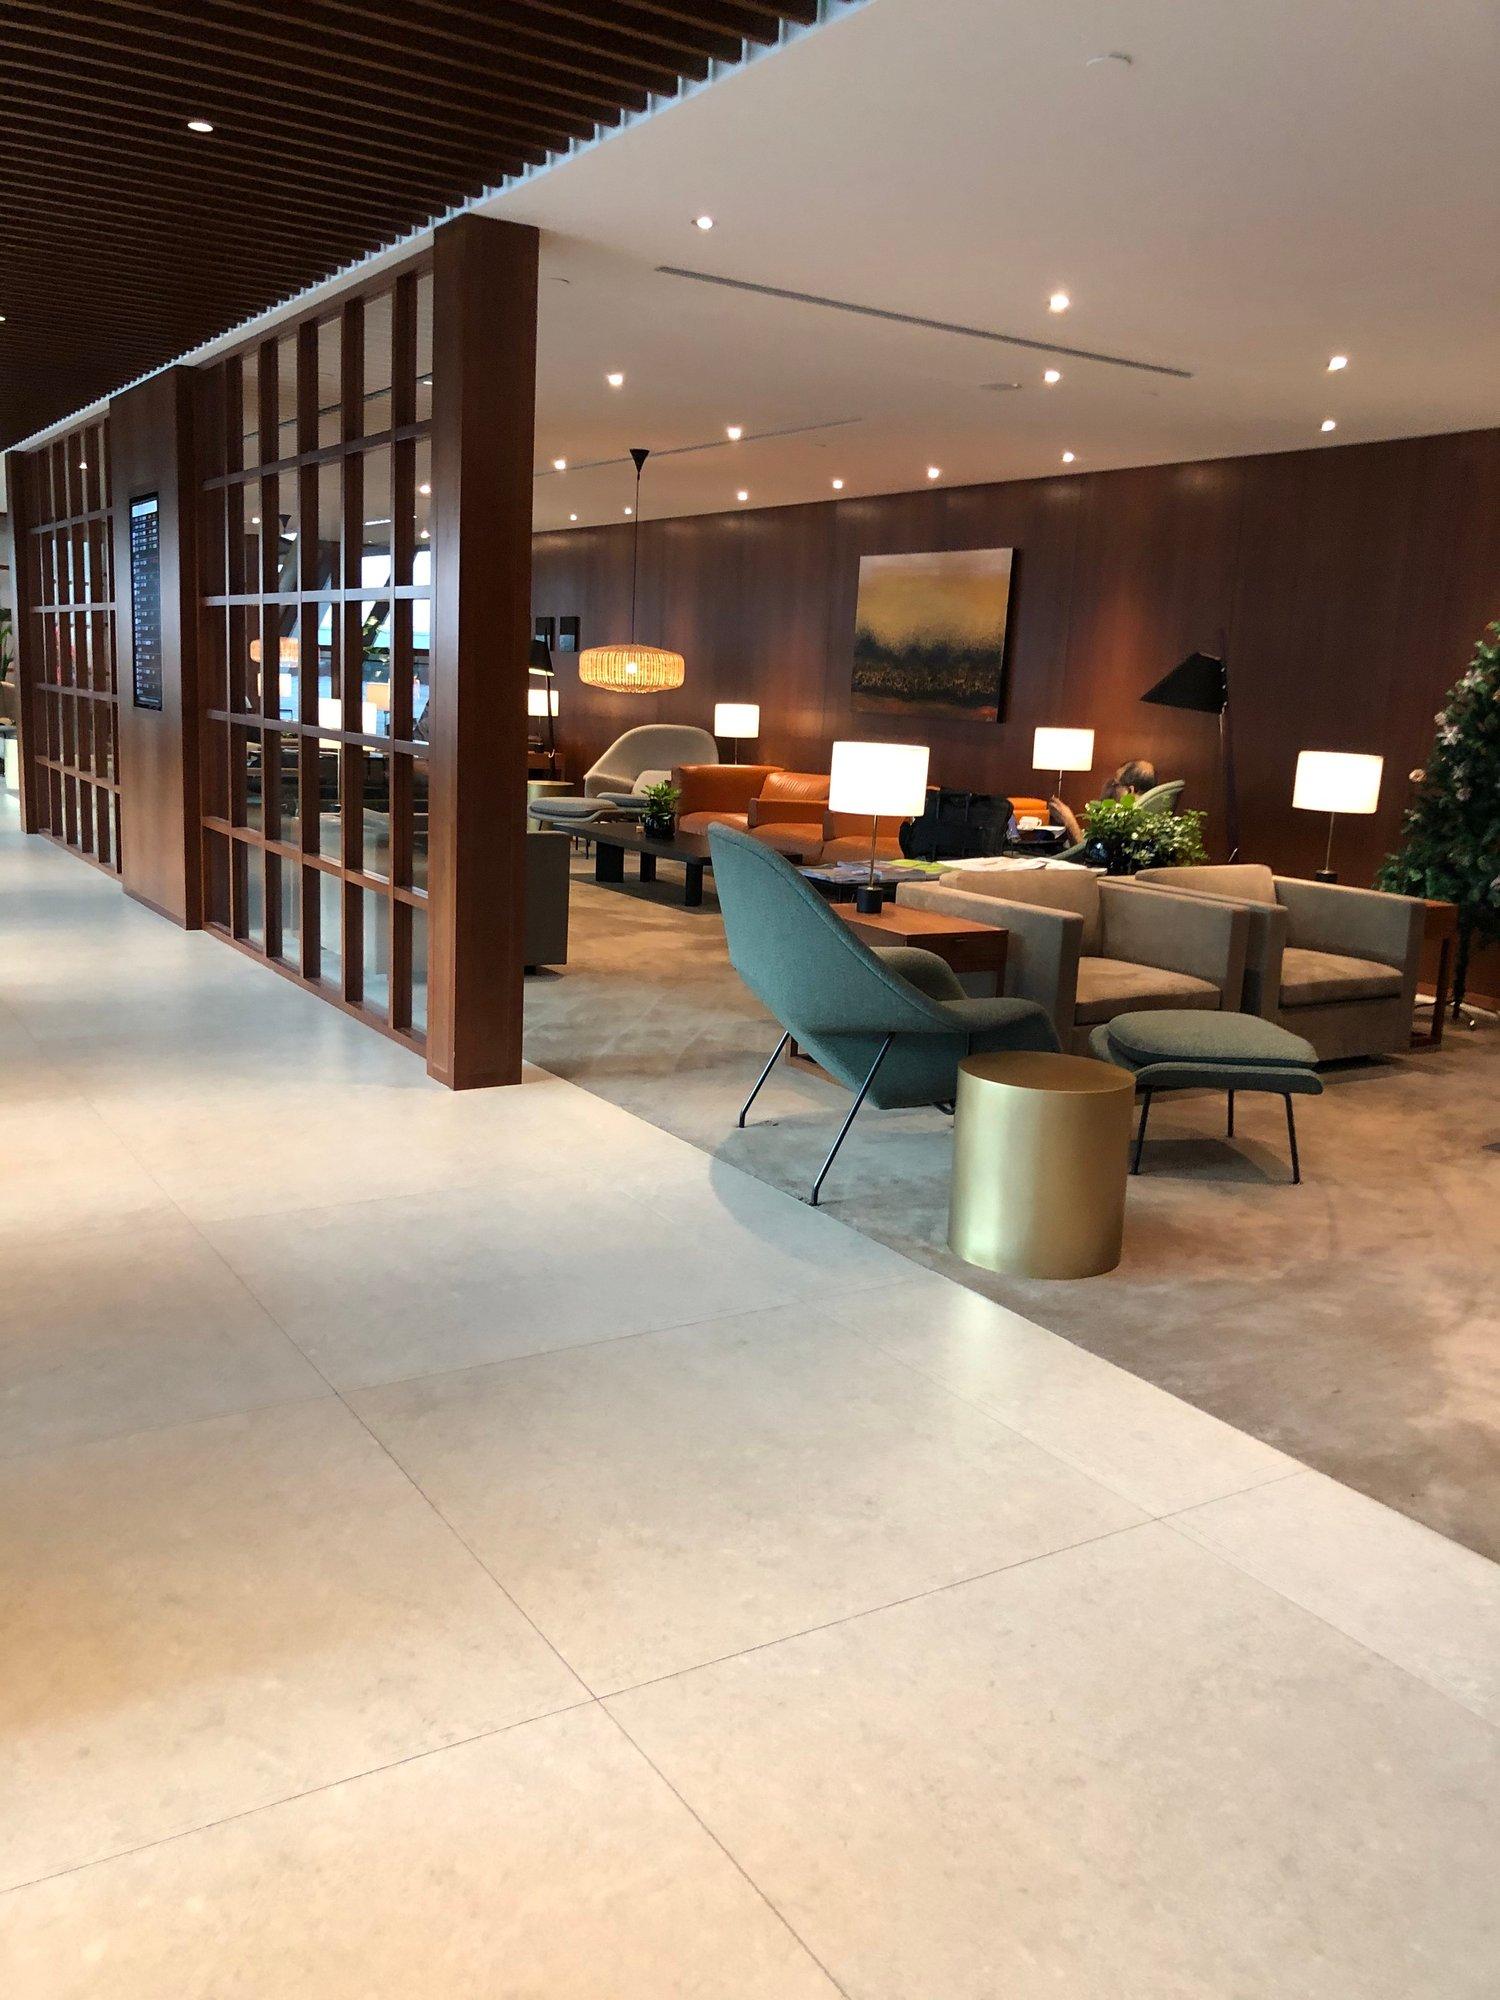 No. 68 Cathay Pacific Business Class Lounge image 6 of 7